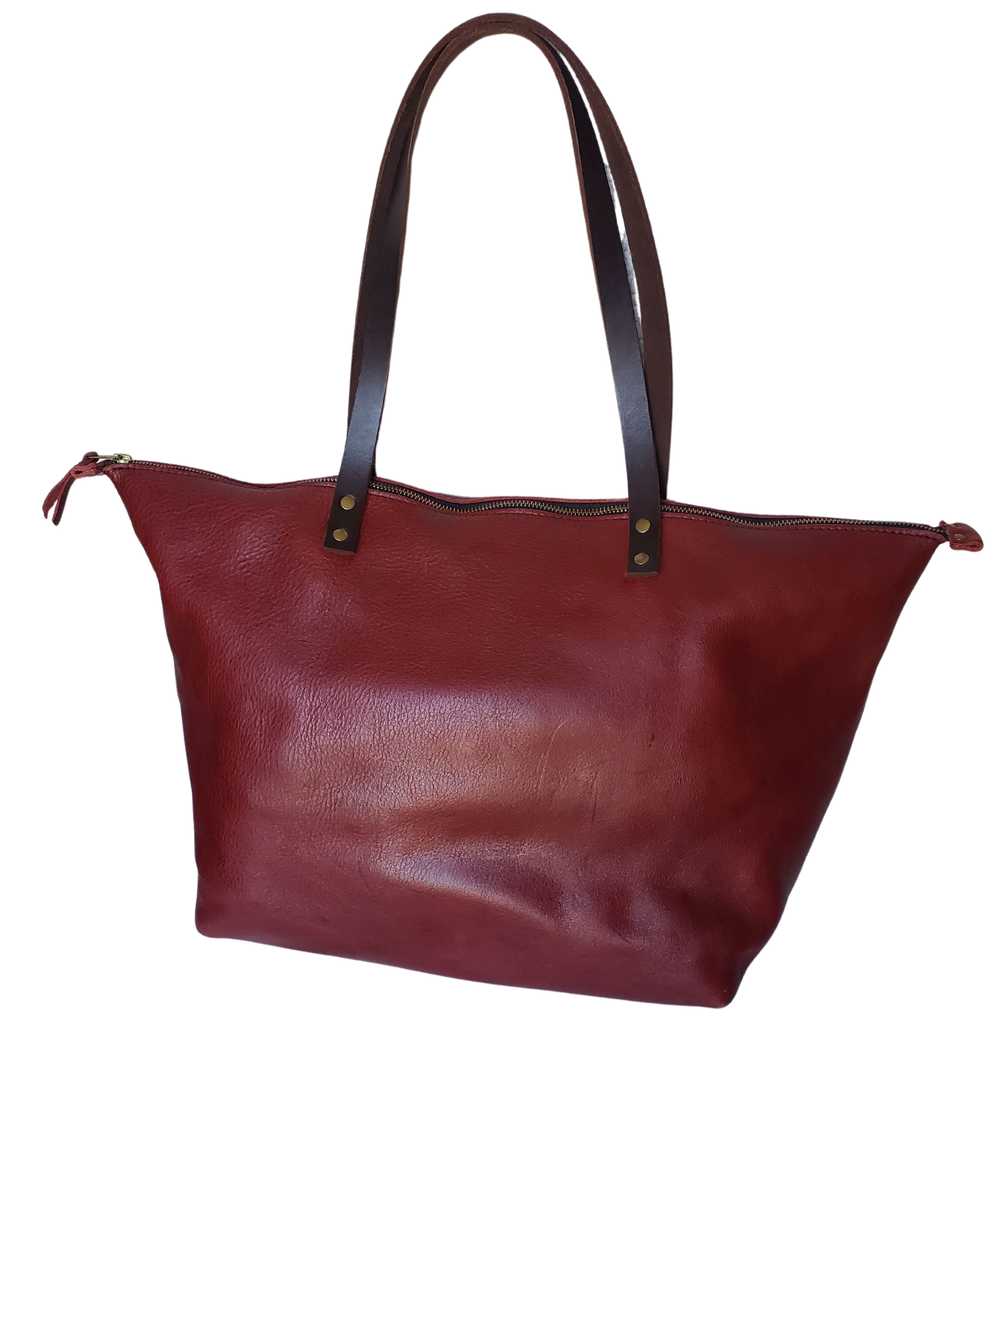 Portland Leather 'Almost Perfect' Leather Tote Bag - image 2